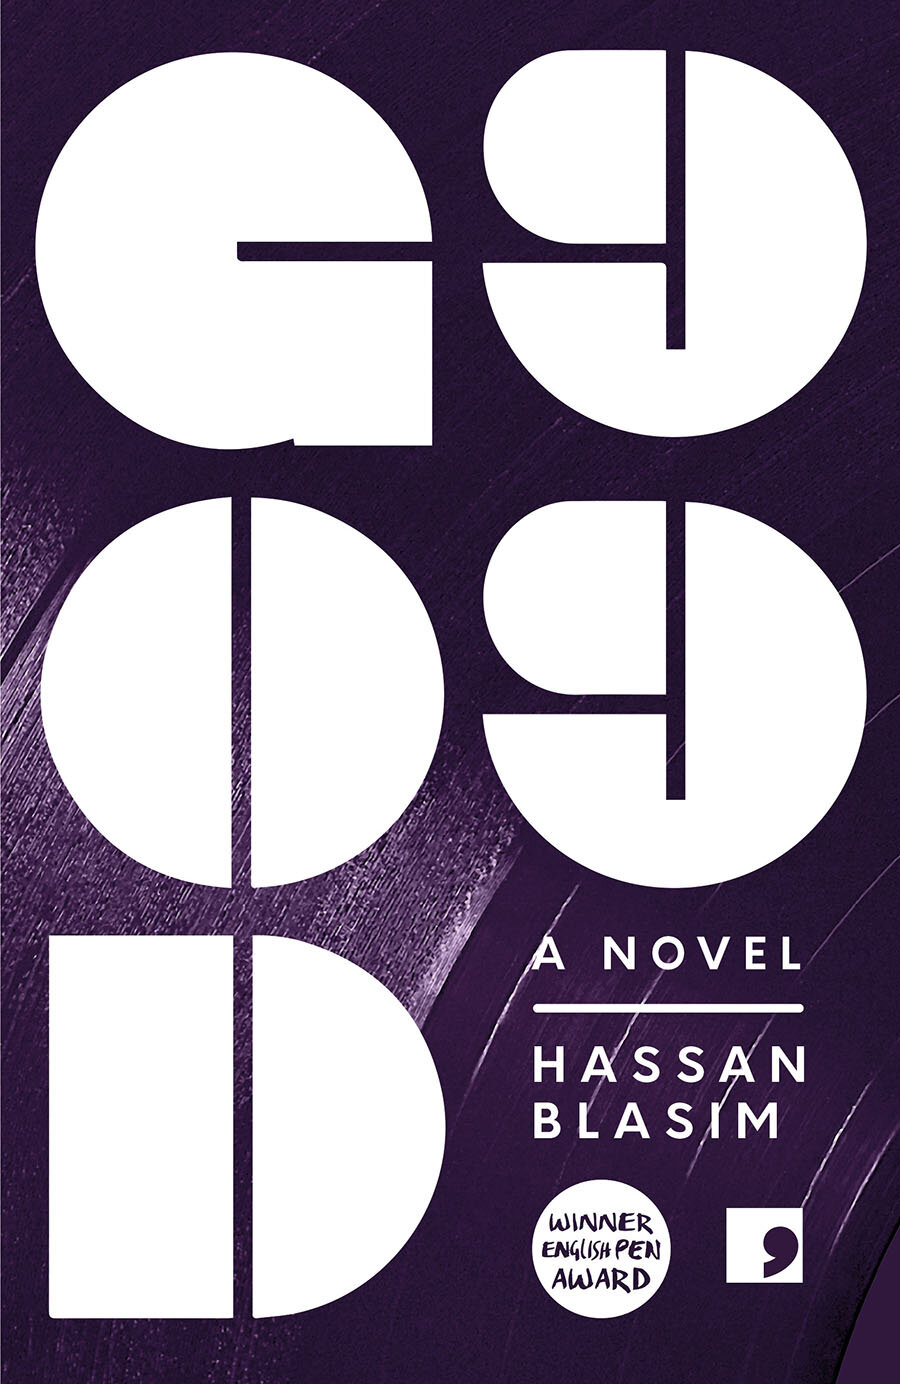 God 99  by Hassan Blasim is new from  Comma Press .